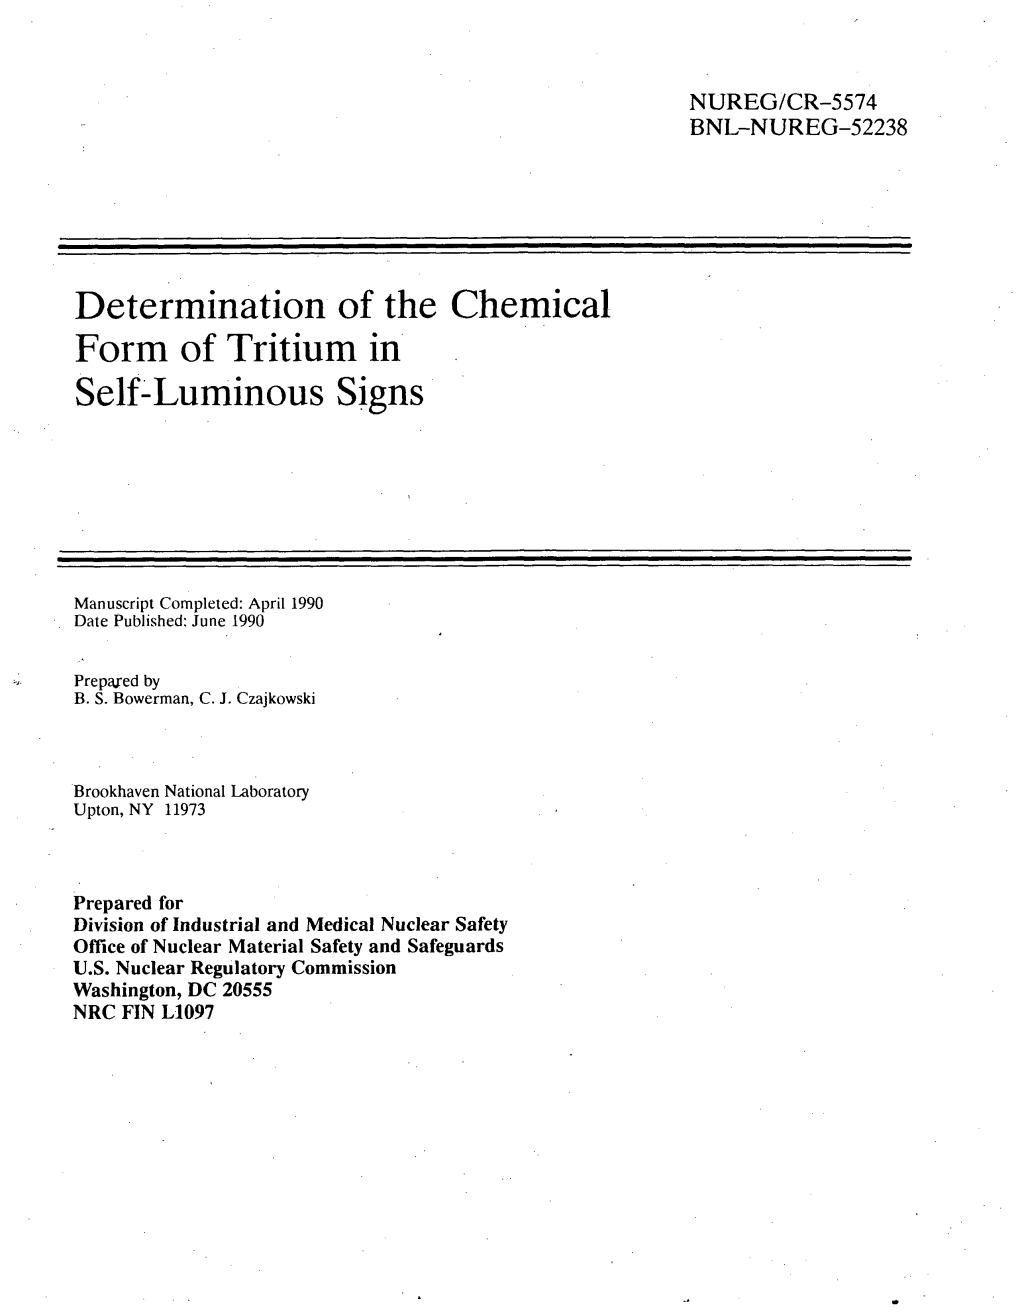 Determination of the Chemical Form of Tritium in Self-Luminous Signs